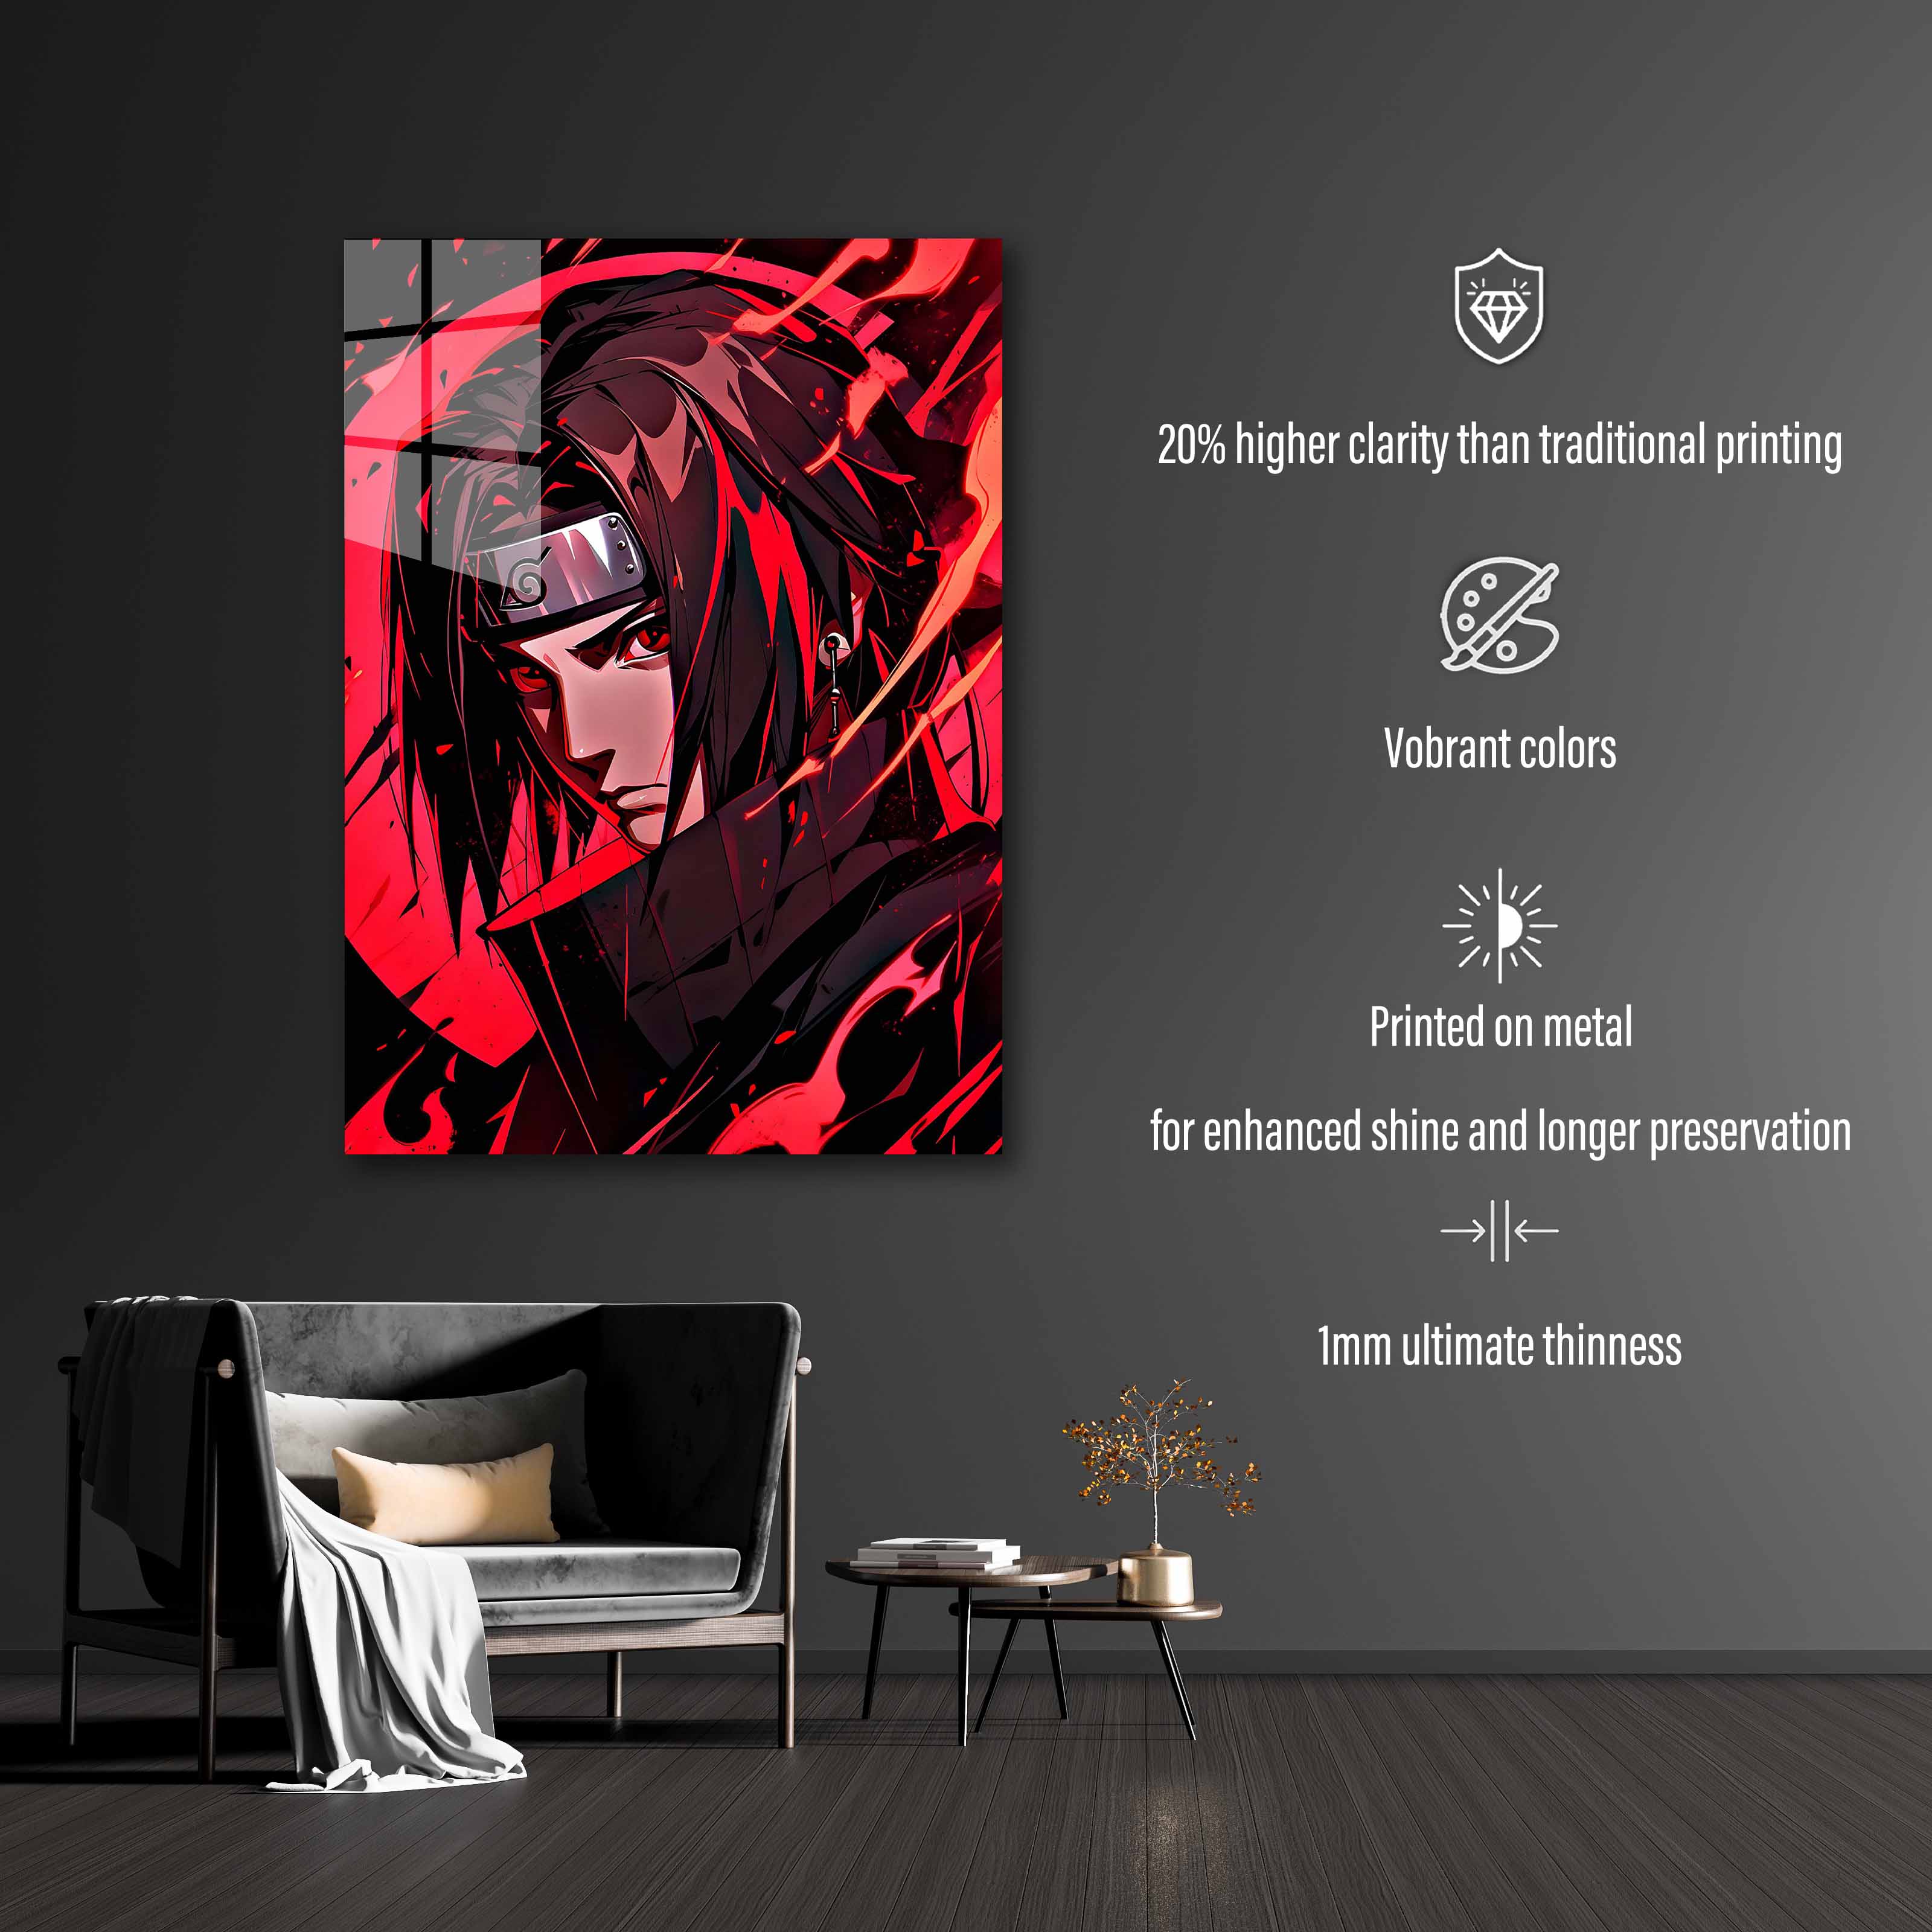 Itachi From Naruto Shippuden-designed by @Vid_M@tion